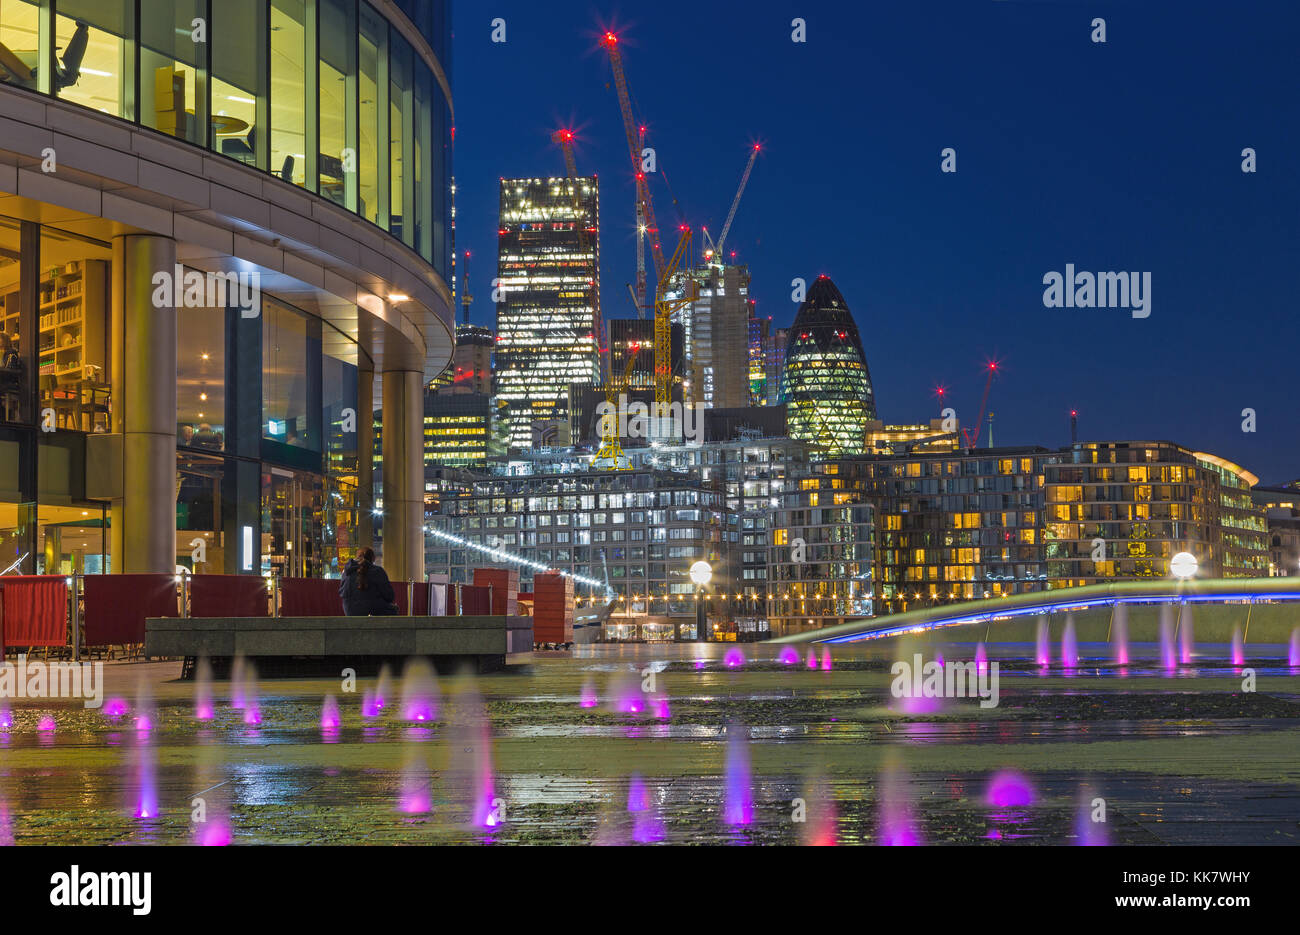 LONDON, GREAT BRITAIN - SEPTEMBER 19, 2017: The view from More London riverside across the fountian to skyscrapers in the center at dusk. Stock Photo